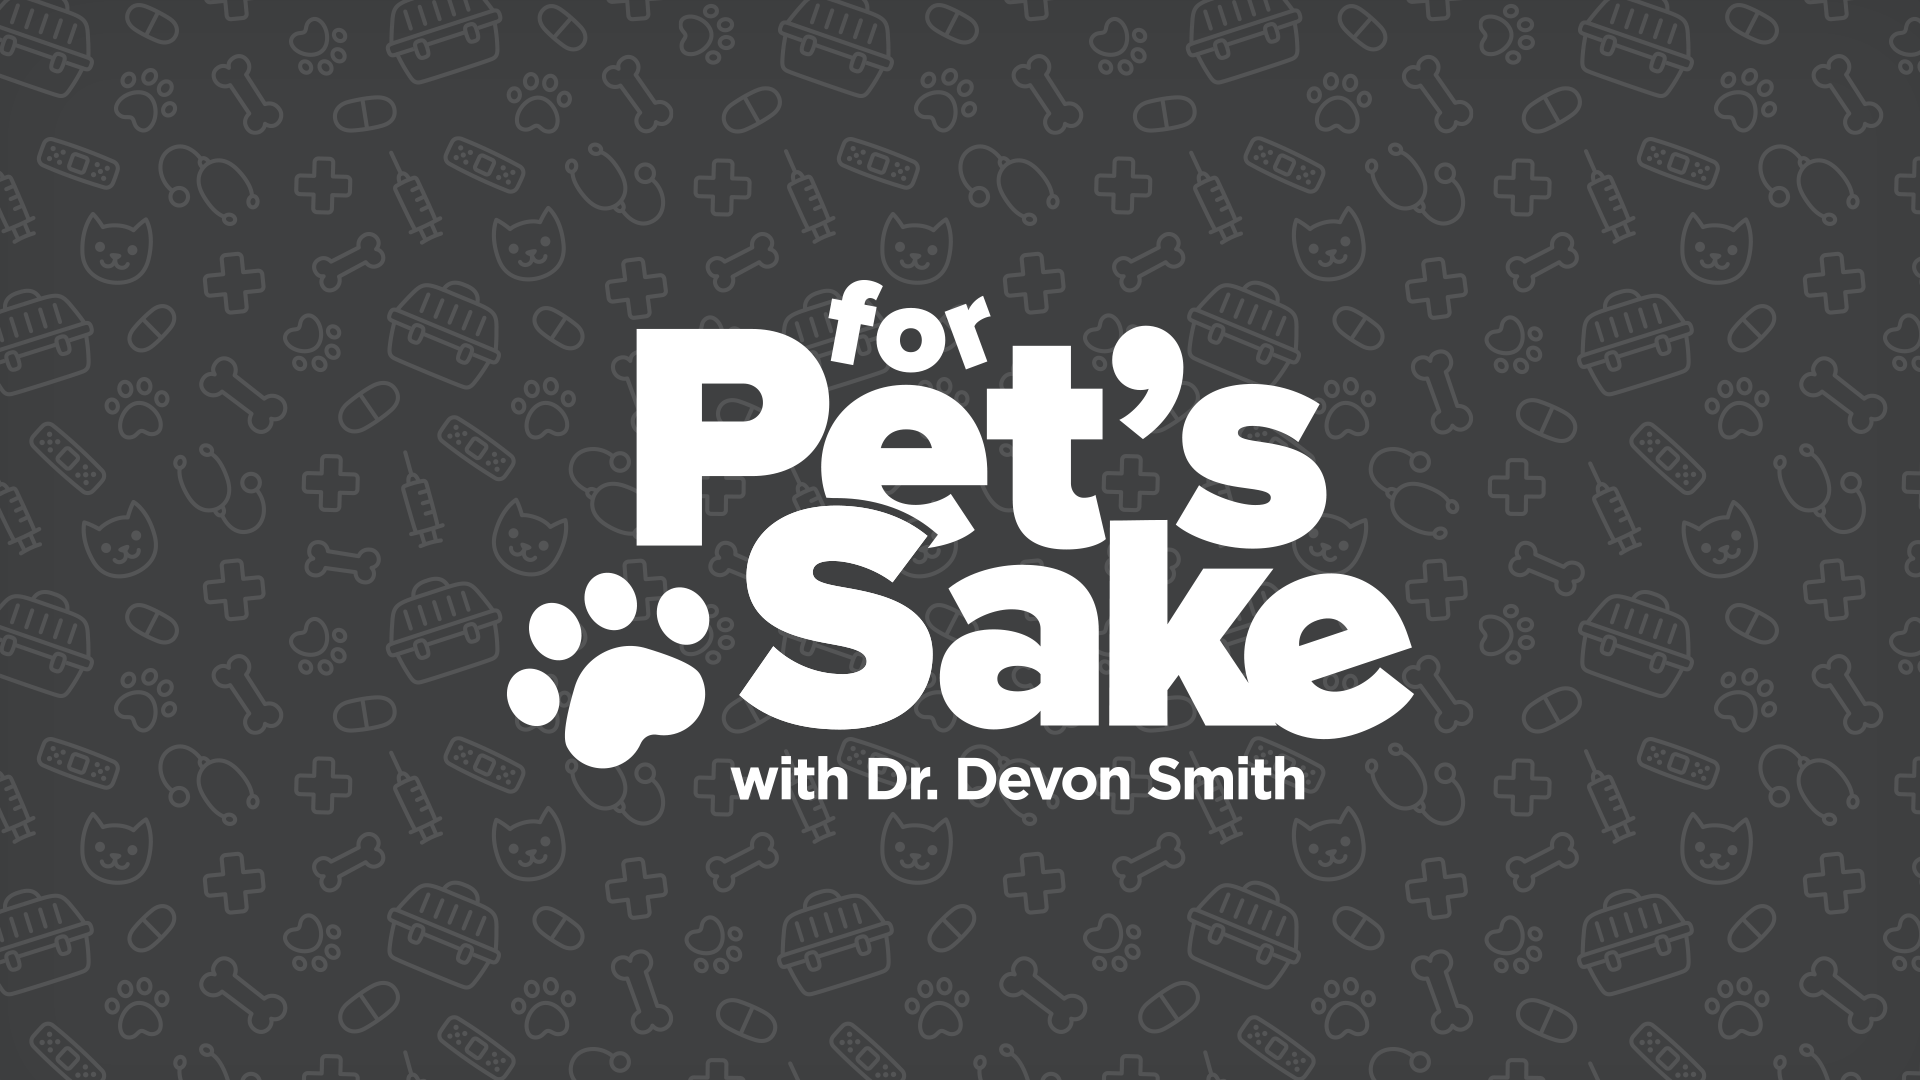 For Pet's Sake with Dr. Devon Smith logo in black and white with cartoon vet pattern background